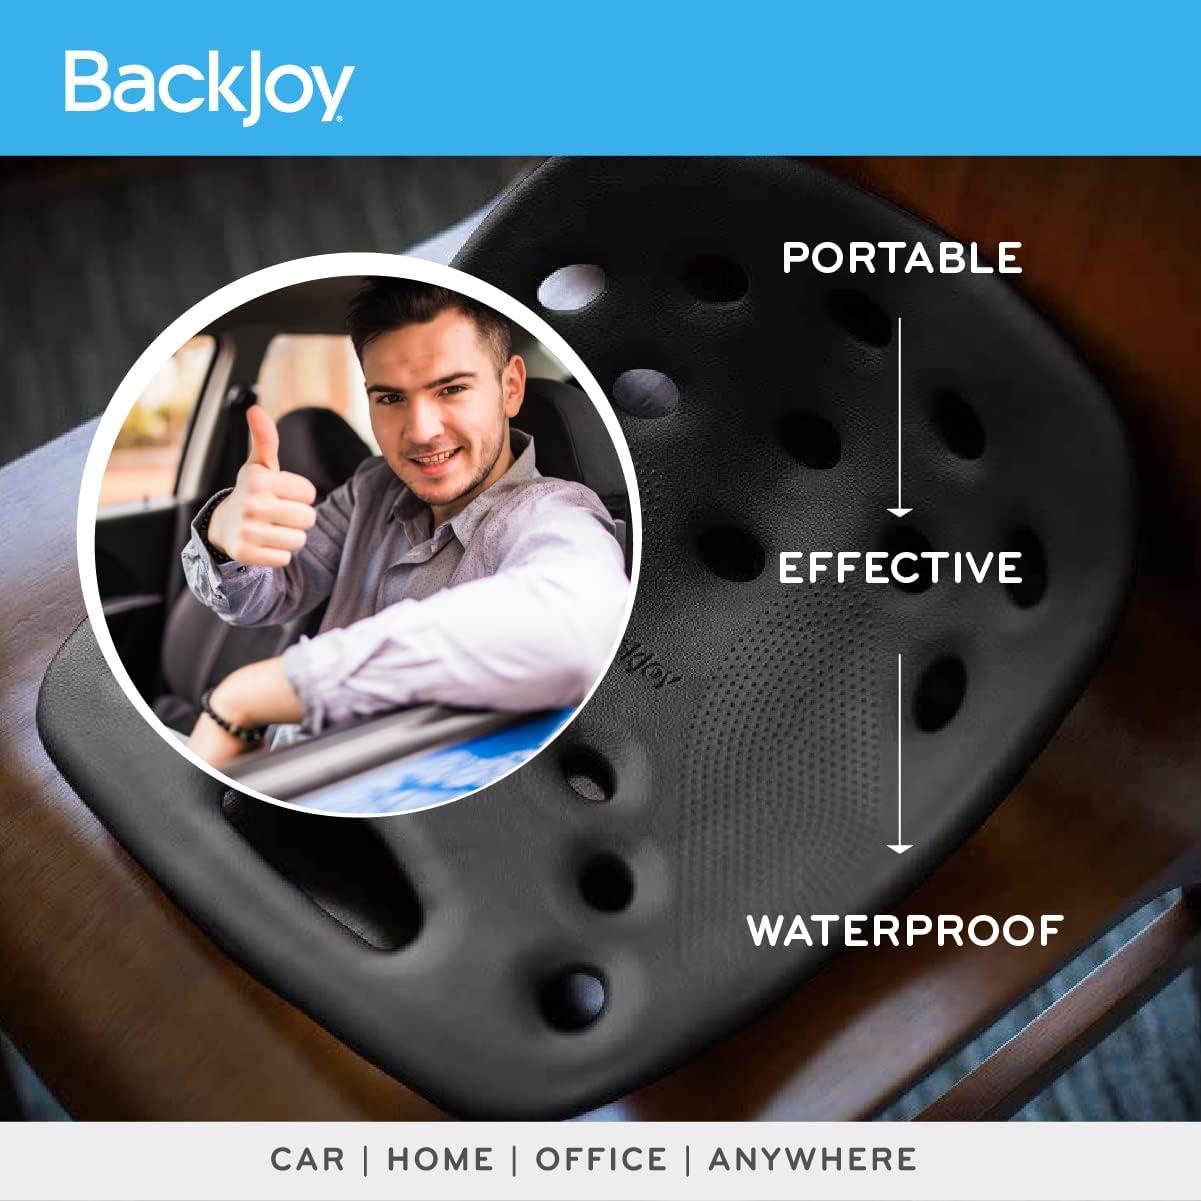 SitSmart Core Traction Portable Posture Seat by Backjoy